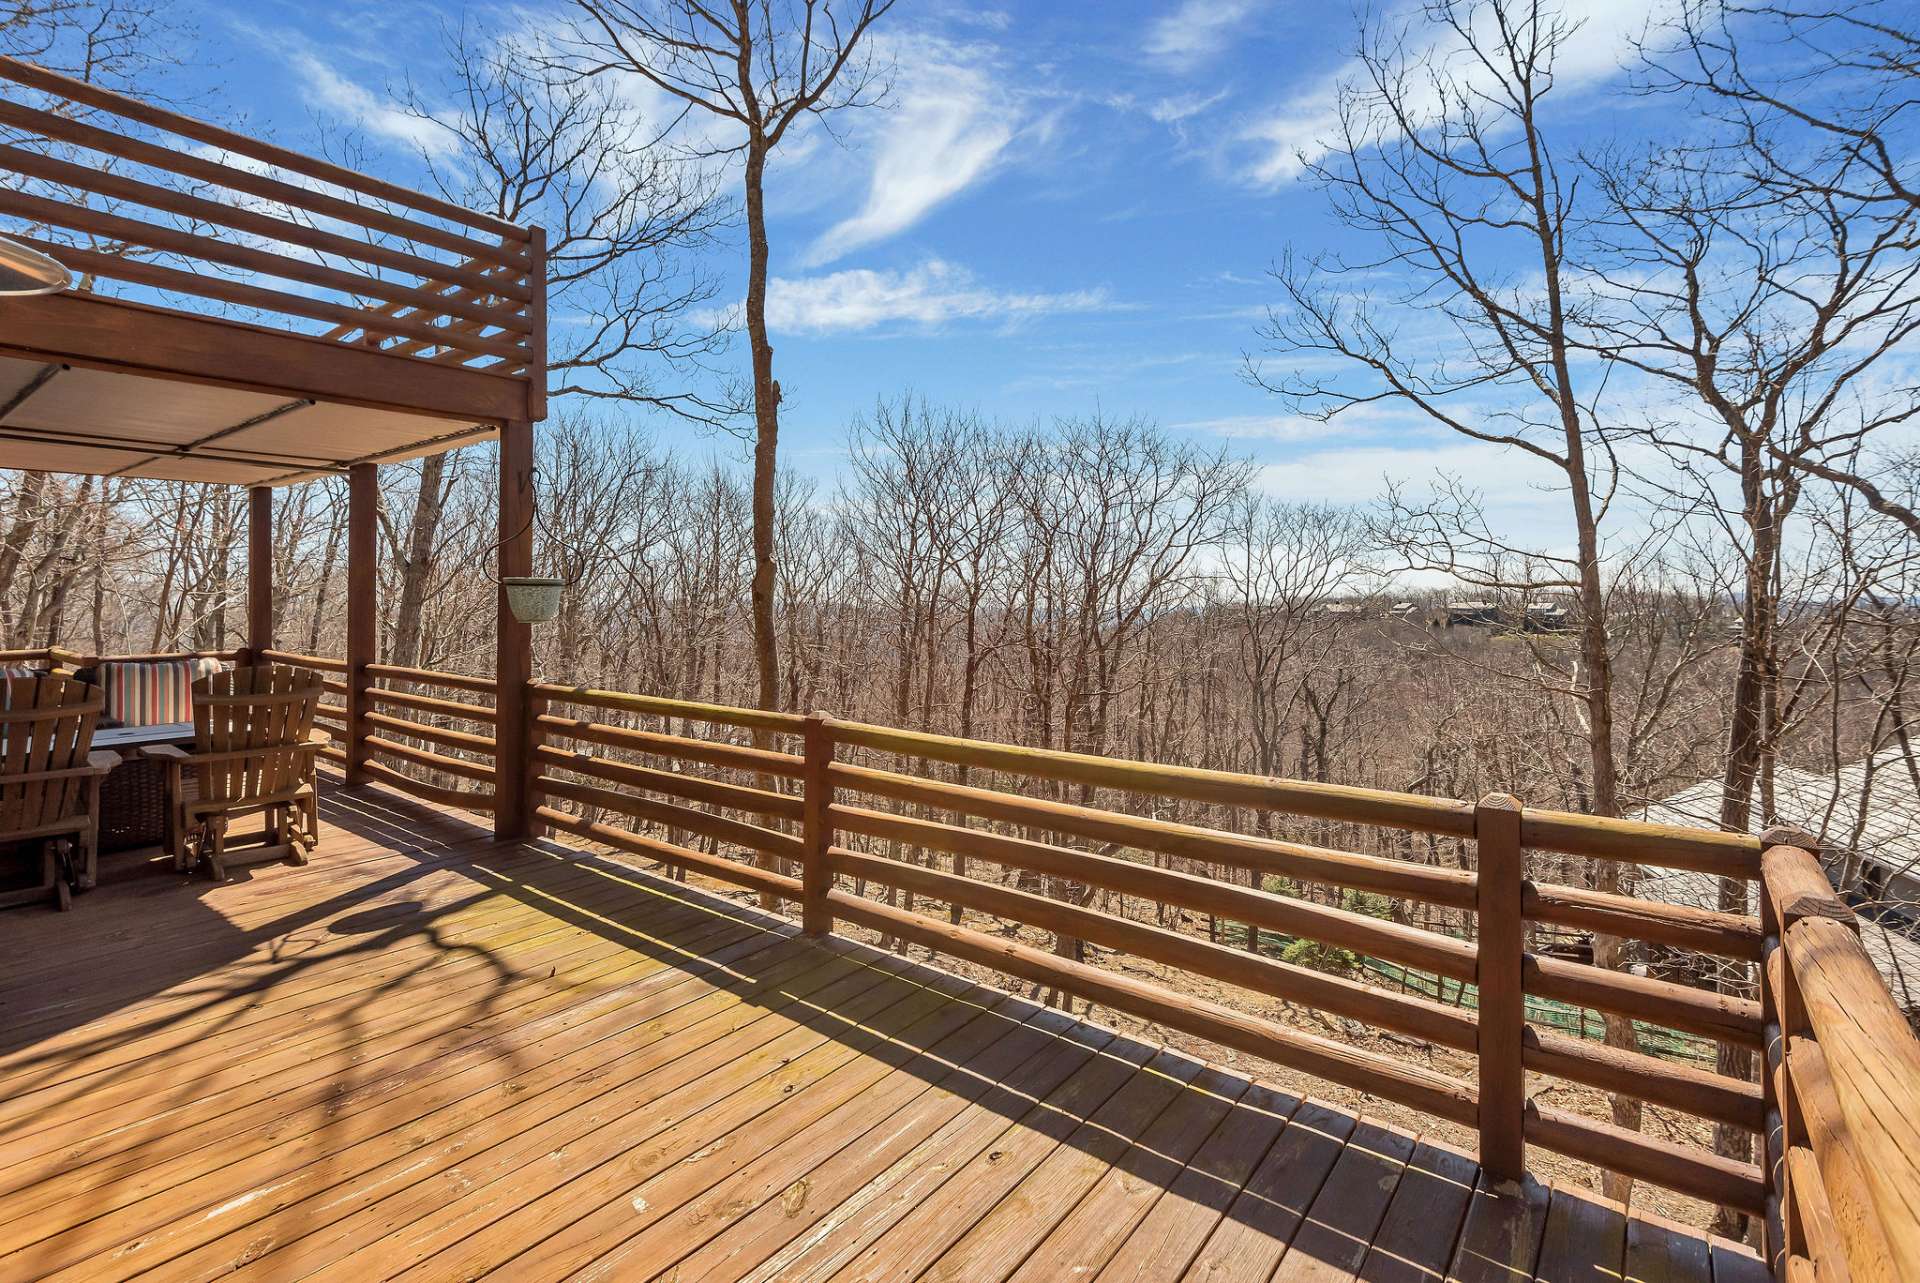 Get your vitamin D on the open side of the deck.